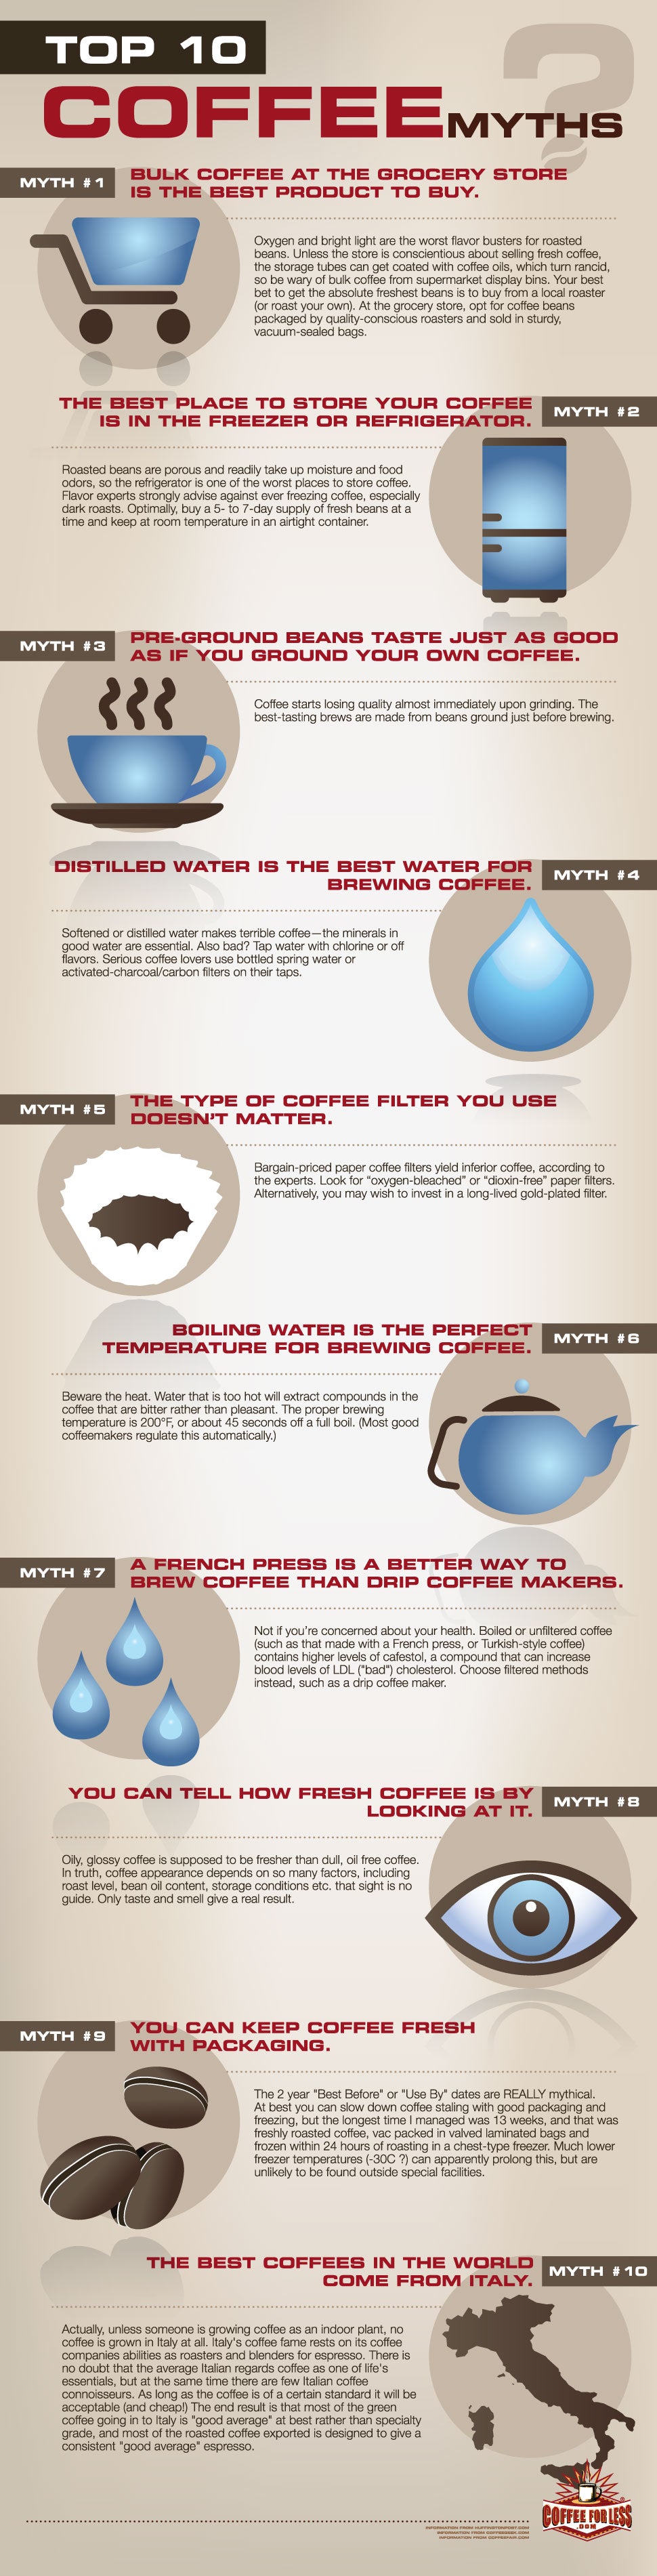 Get your coffee facts straight with these 10 debunked coffee myths.